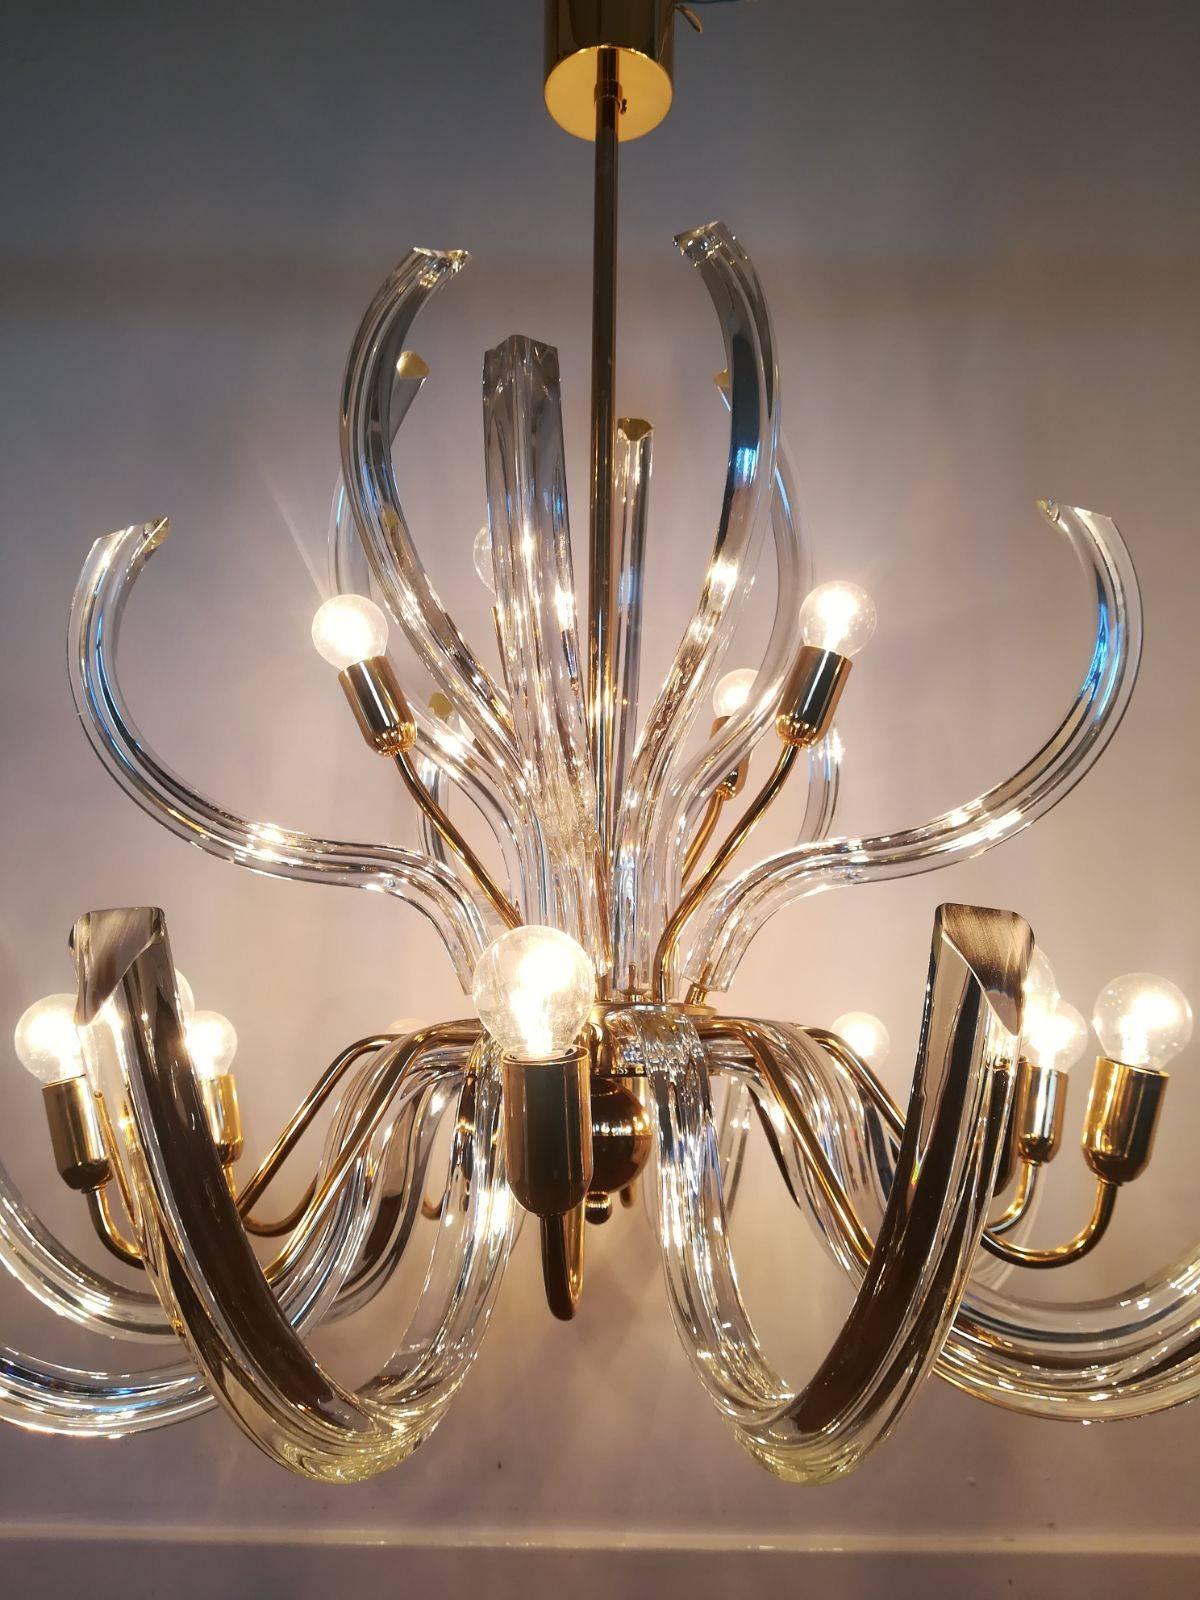 This large Mid-Century Modern chandelier by Paolo Venini features individually handmade Murano crystal clear glass prisms on a brass frame.

Stunning how the clear crystal prisms reflect the light!

Measurements: High from bottom to ceiling 98